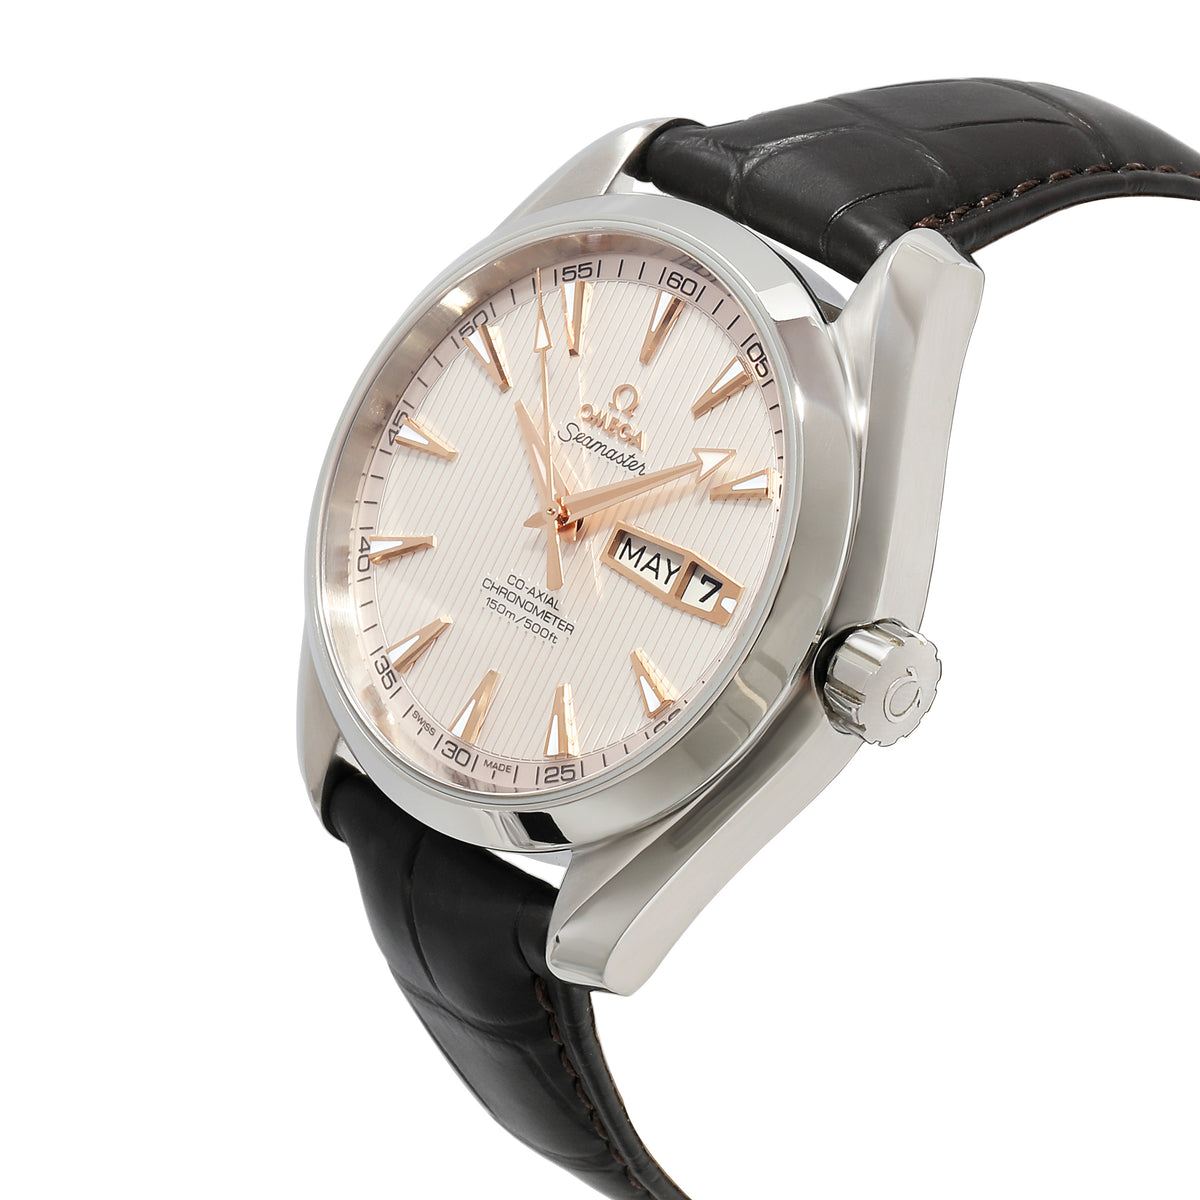 Seamaster Annual Calendar  r 231.13.43.22.02.002 Men's Watch in  Stainless